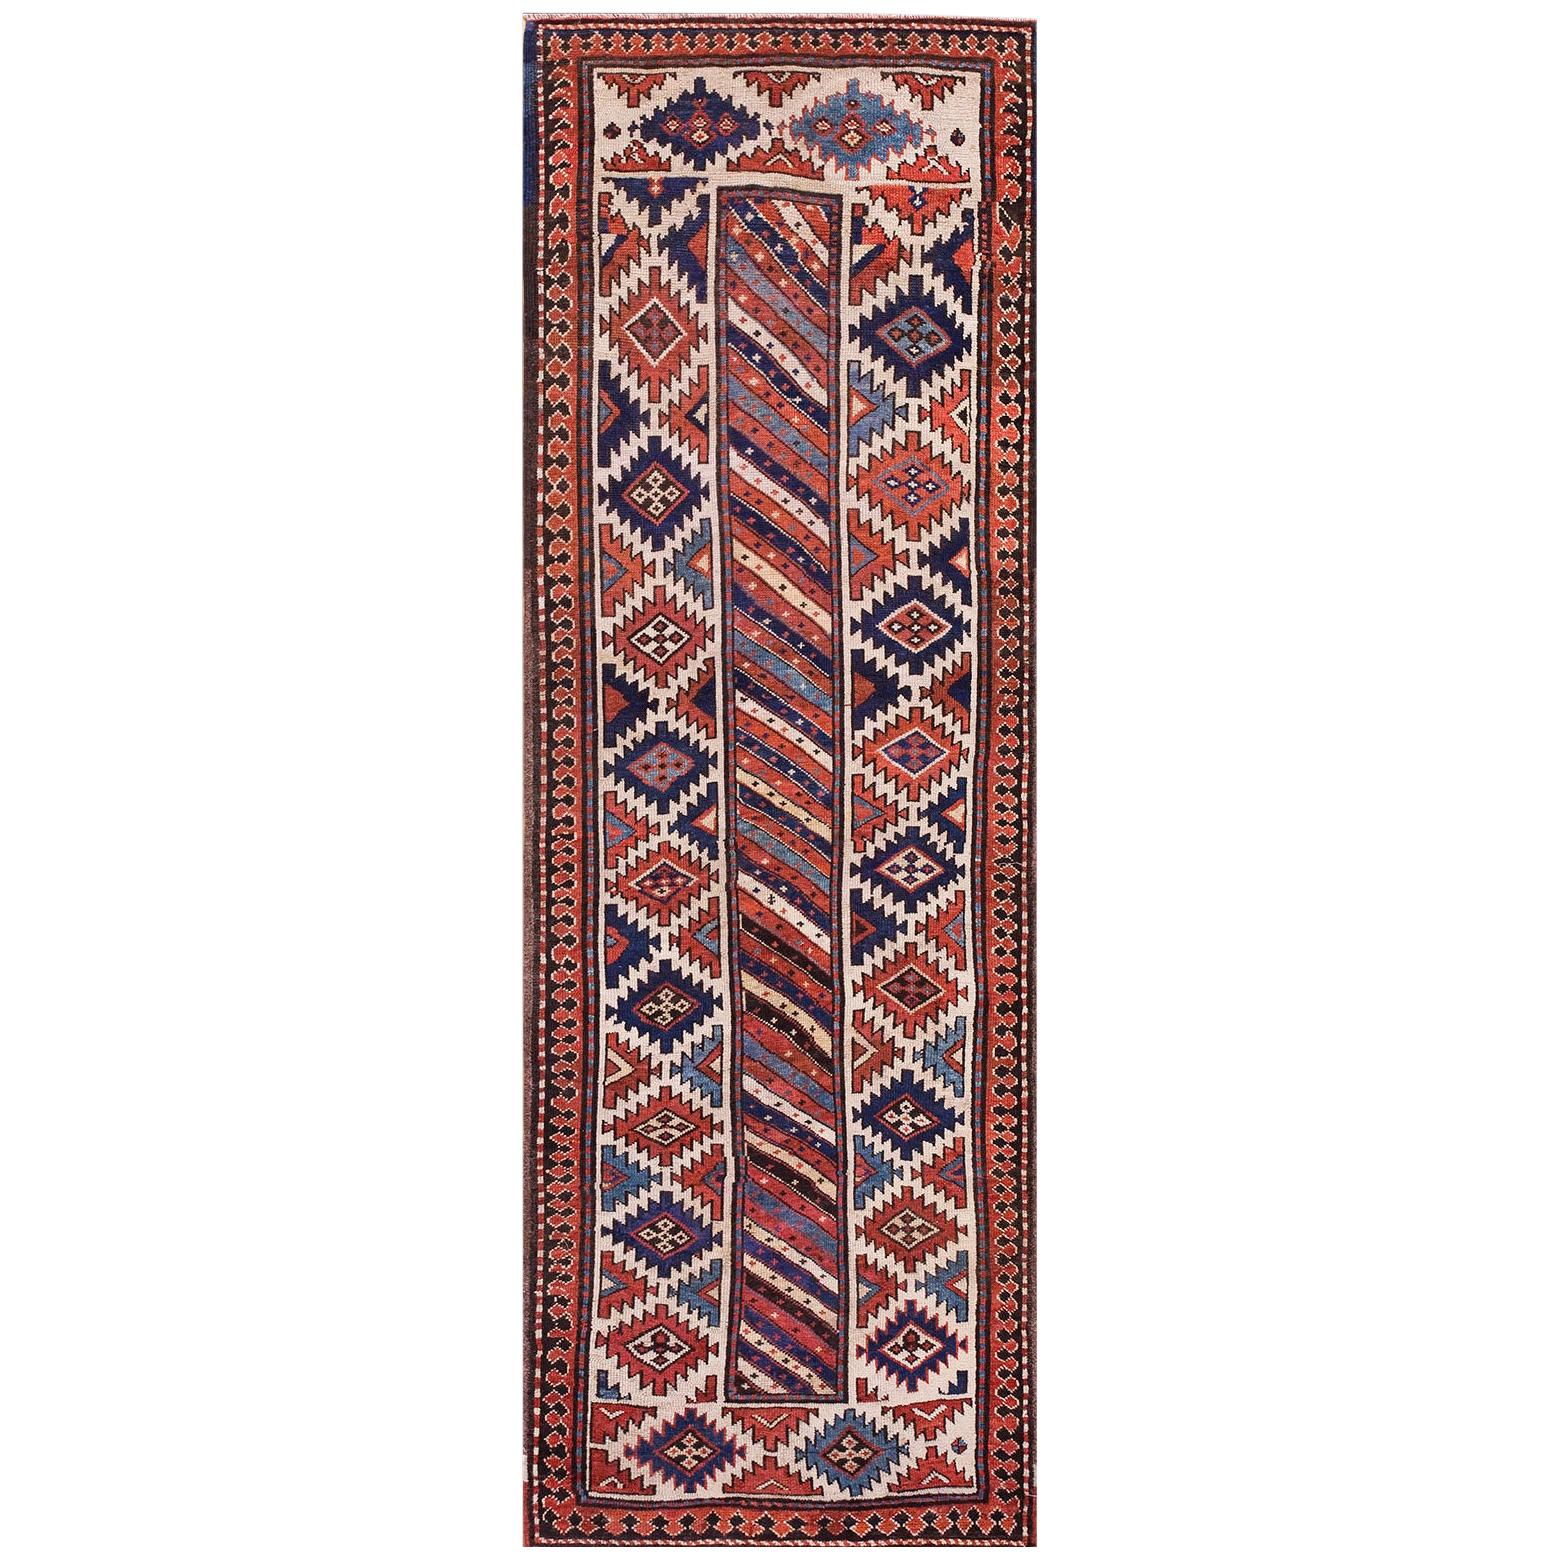 Late 19th Century N.W. Persian Carpet ( 3'2" x 9'2" - 97 x 280 ) For Sale